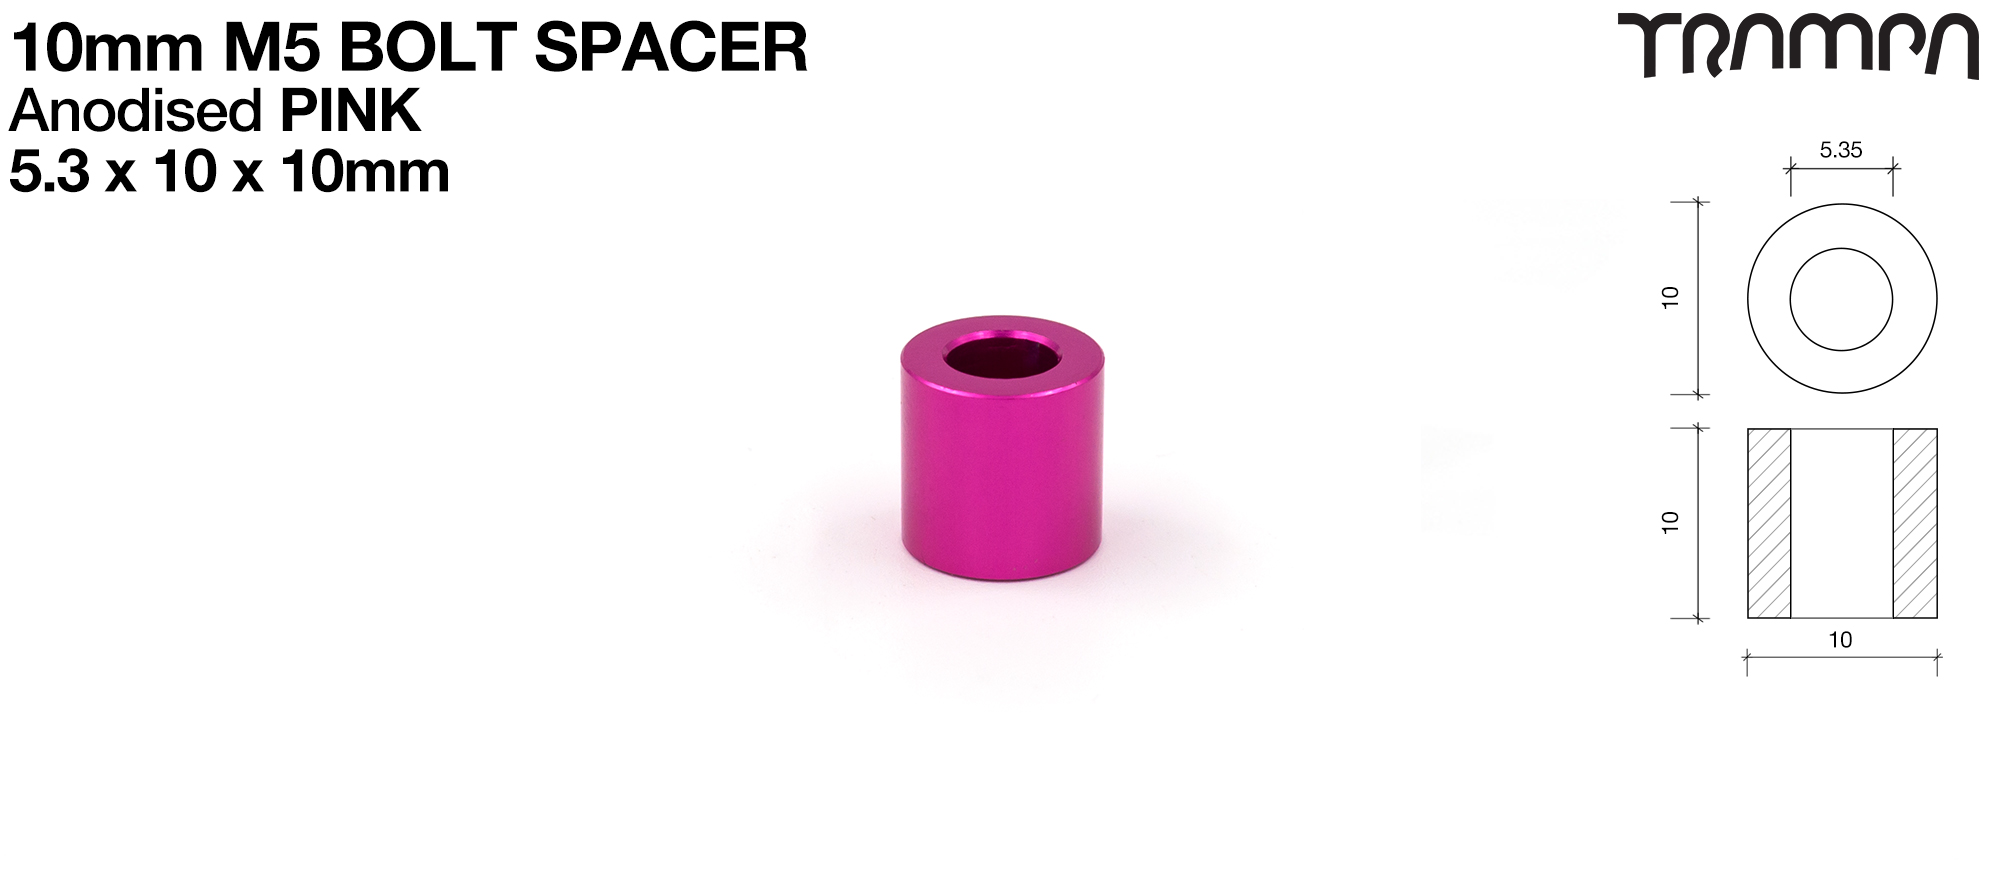 M5 x 10 x 10mm Spacer - Anodised PINK